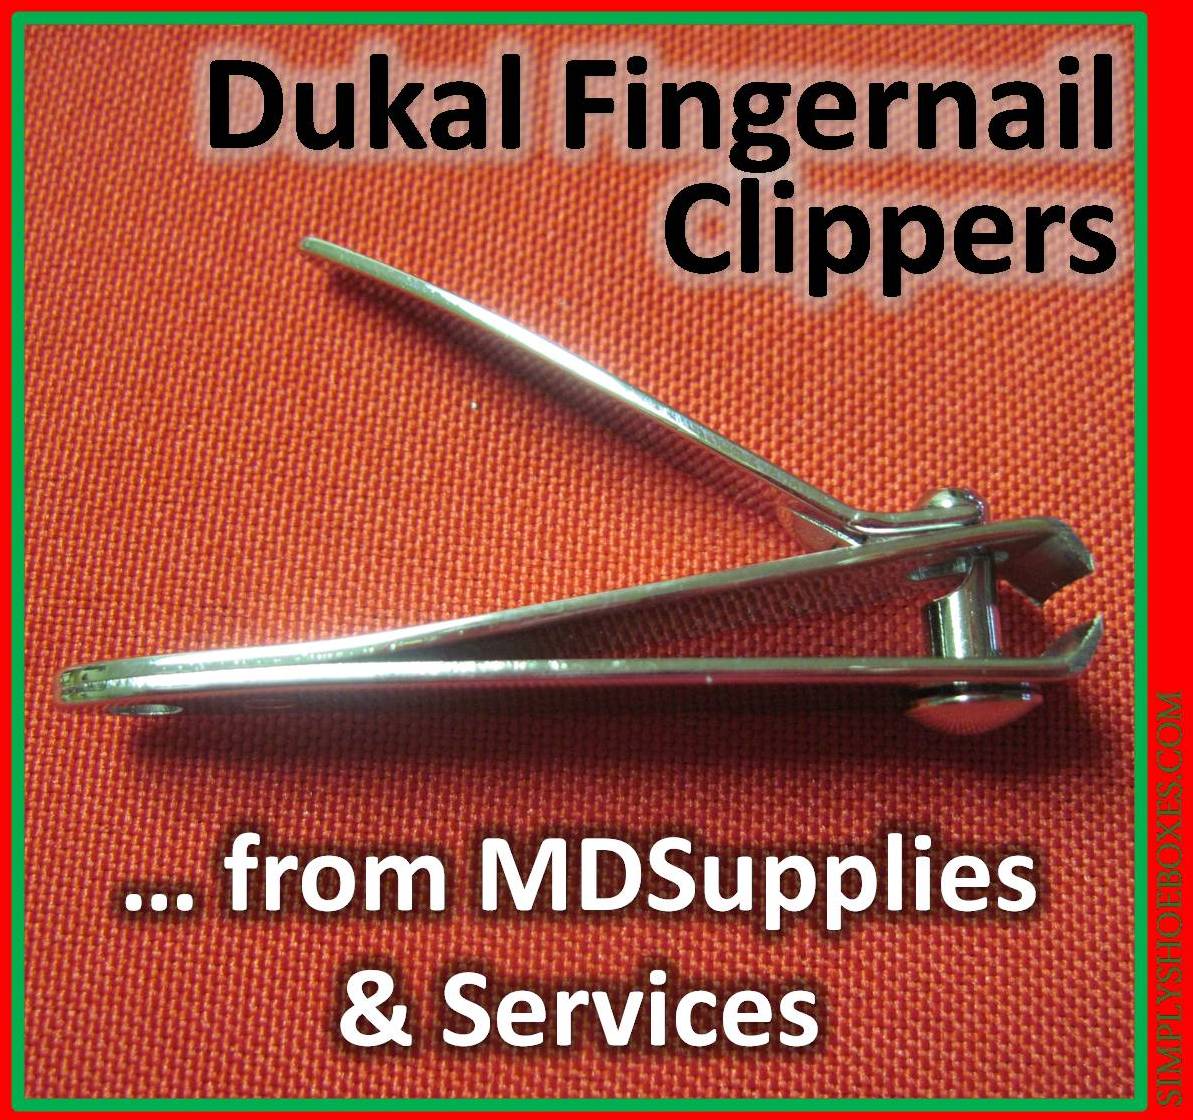  Genuine No-mes Fingernail Clipper, Catches Clippings, Made in  USA : Beauty & Personal Care